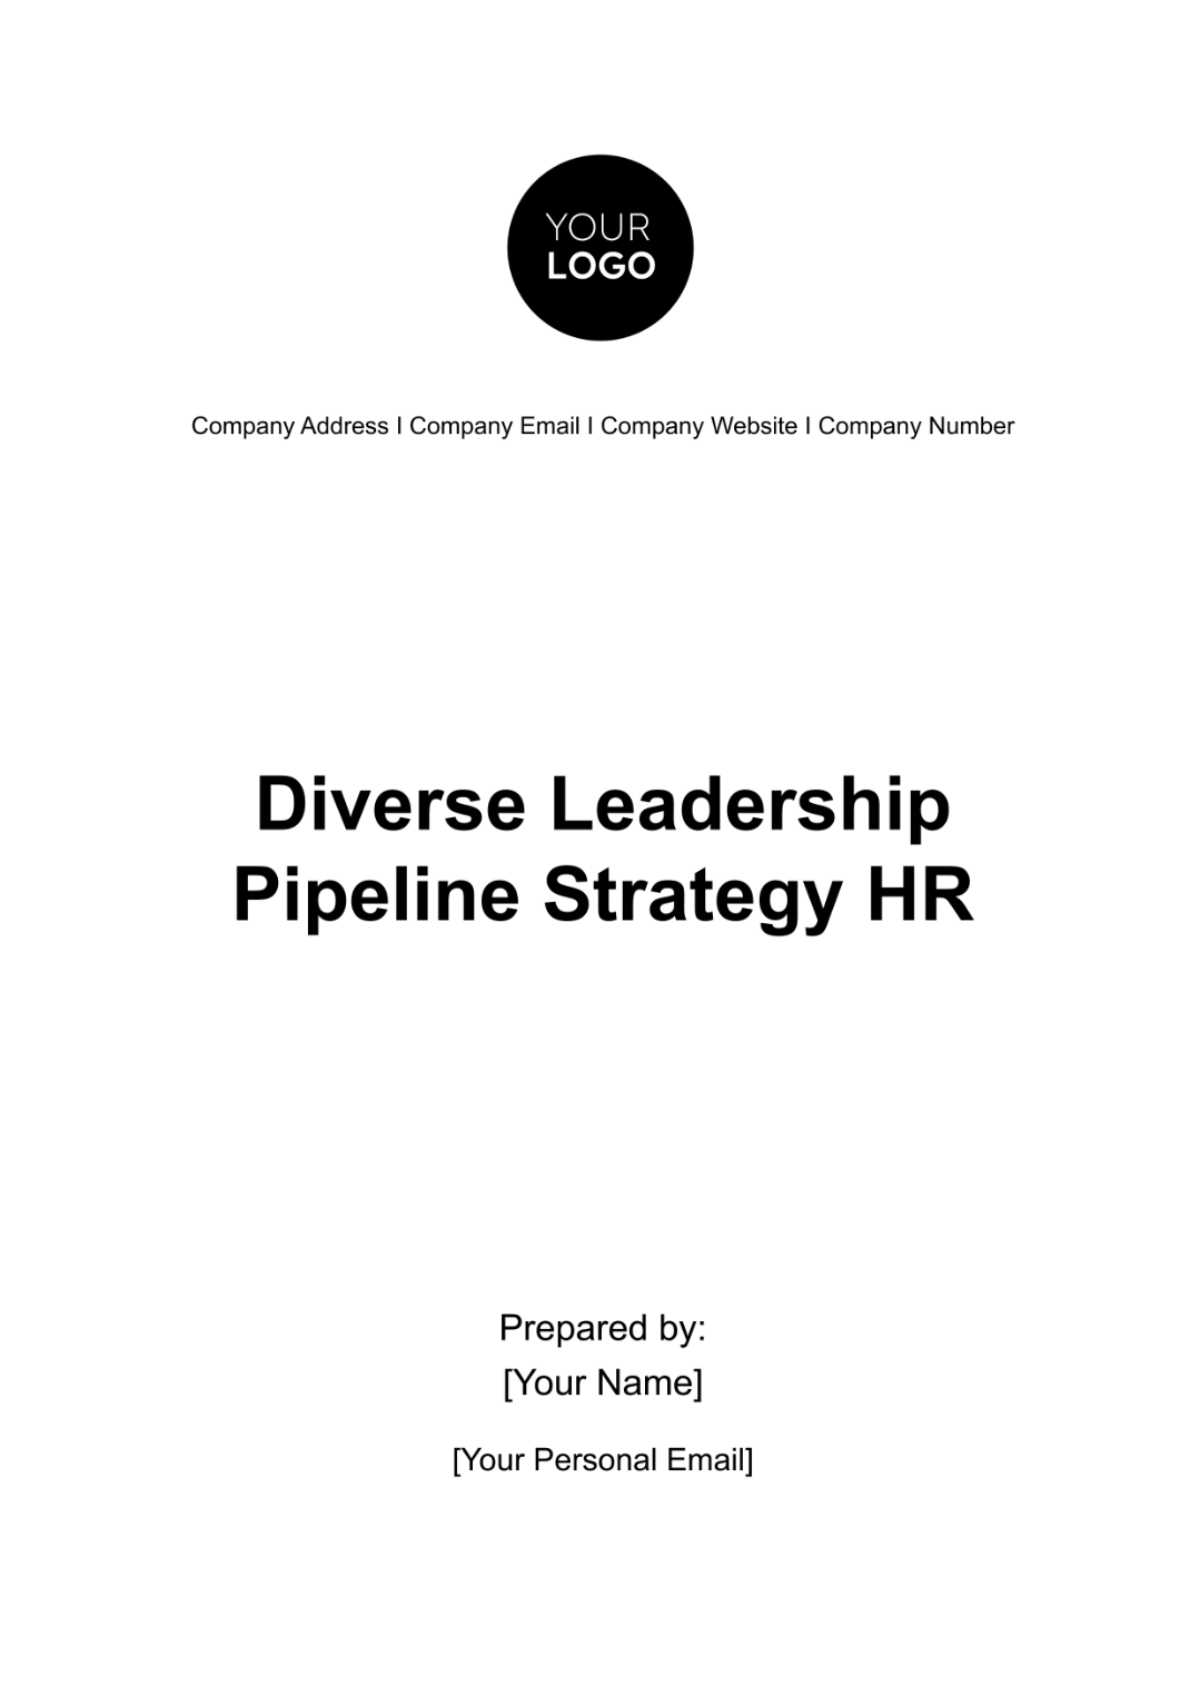 Diverse Leadership Pipeline Strategy HR Template